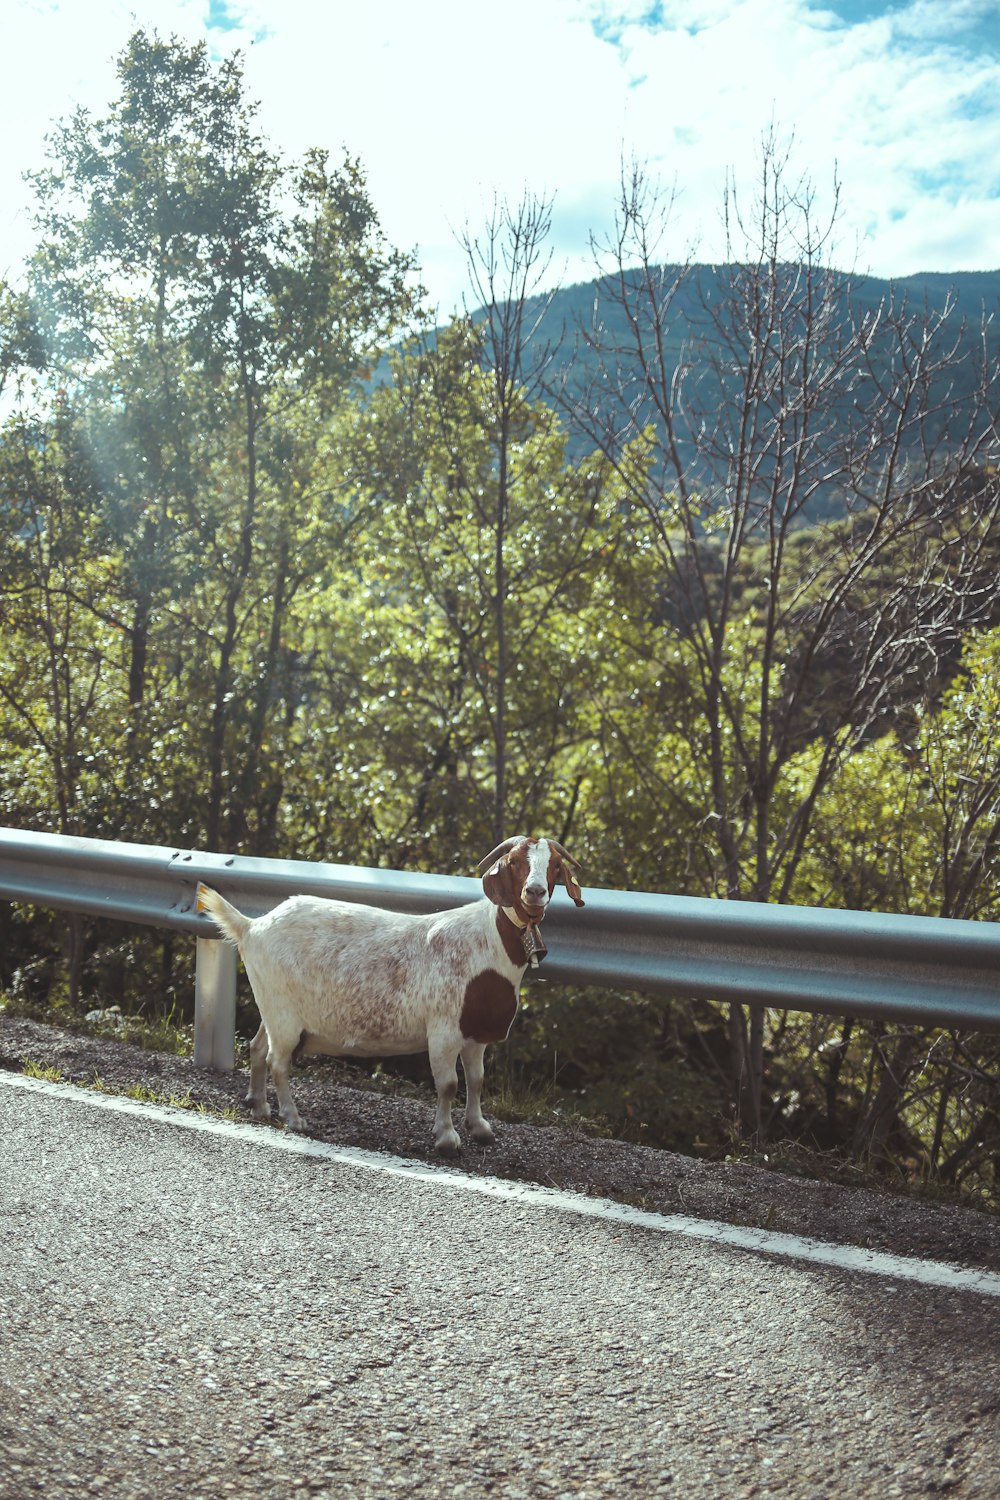 a goat standing on a road